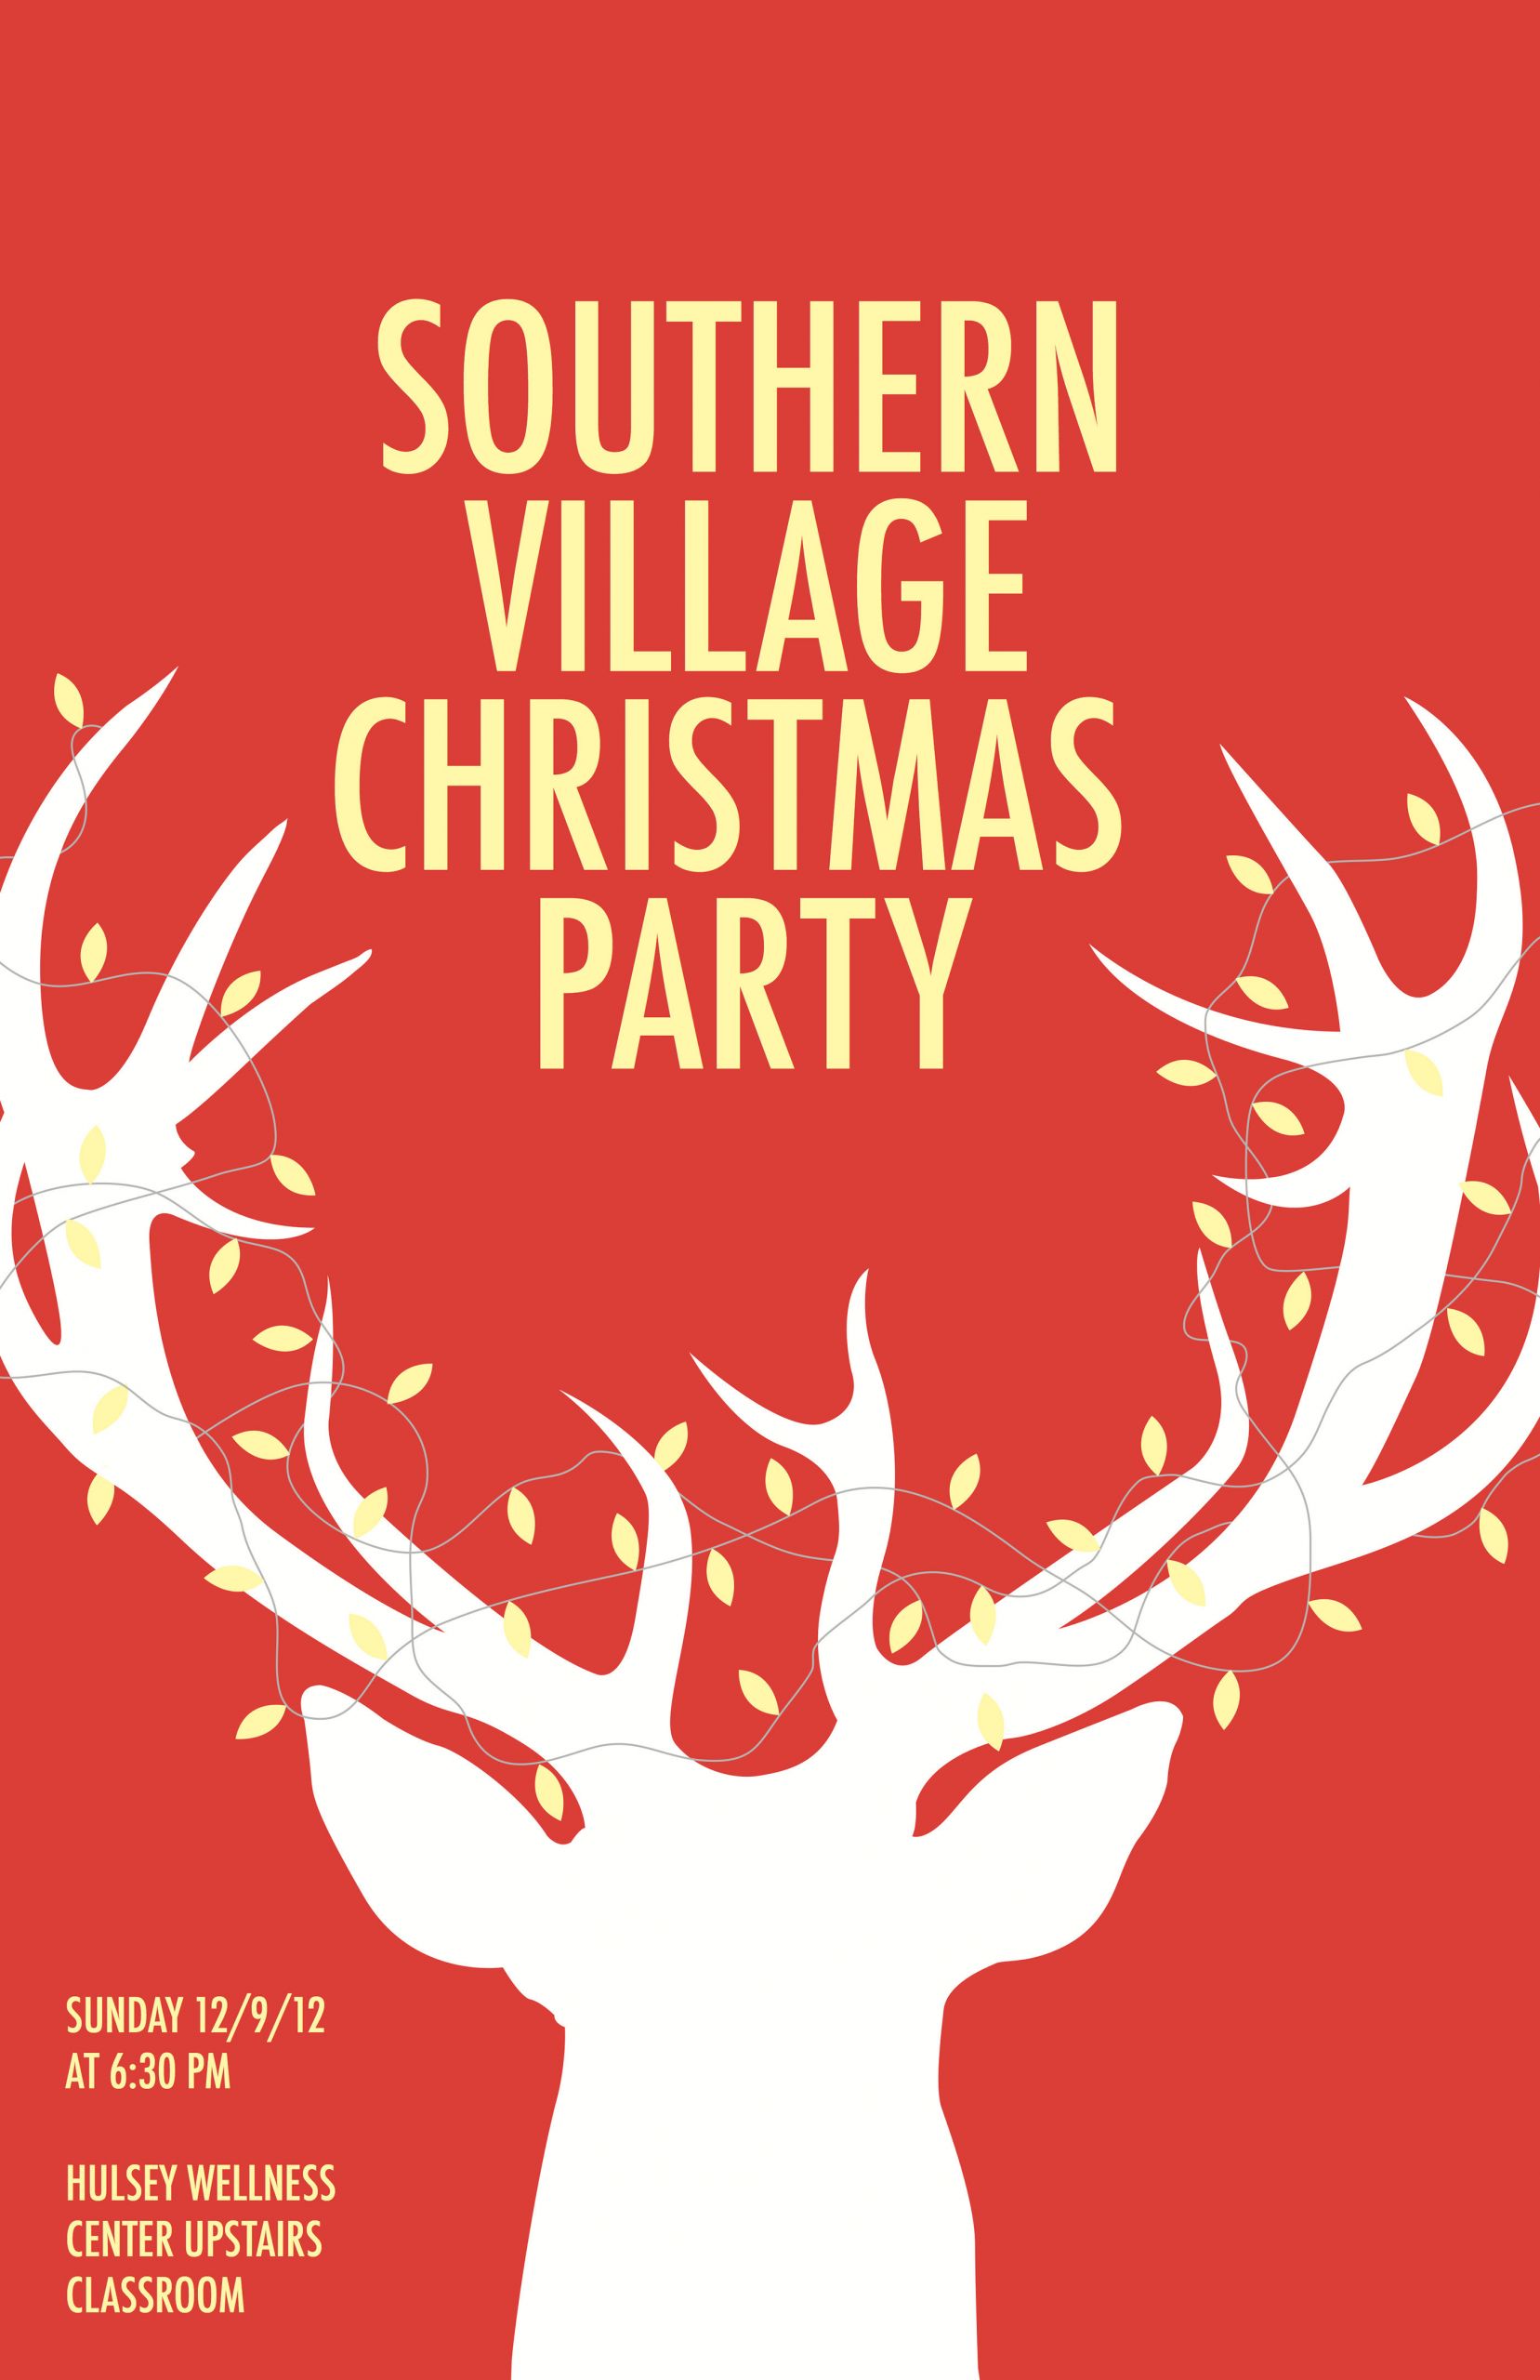 Christmas Party Posters Ideas
 10 Creative Christmas Poster Design Ideas & Examples